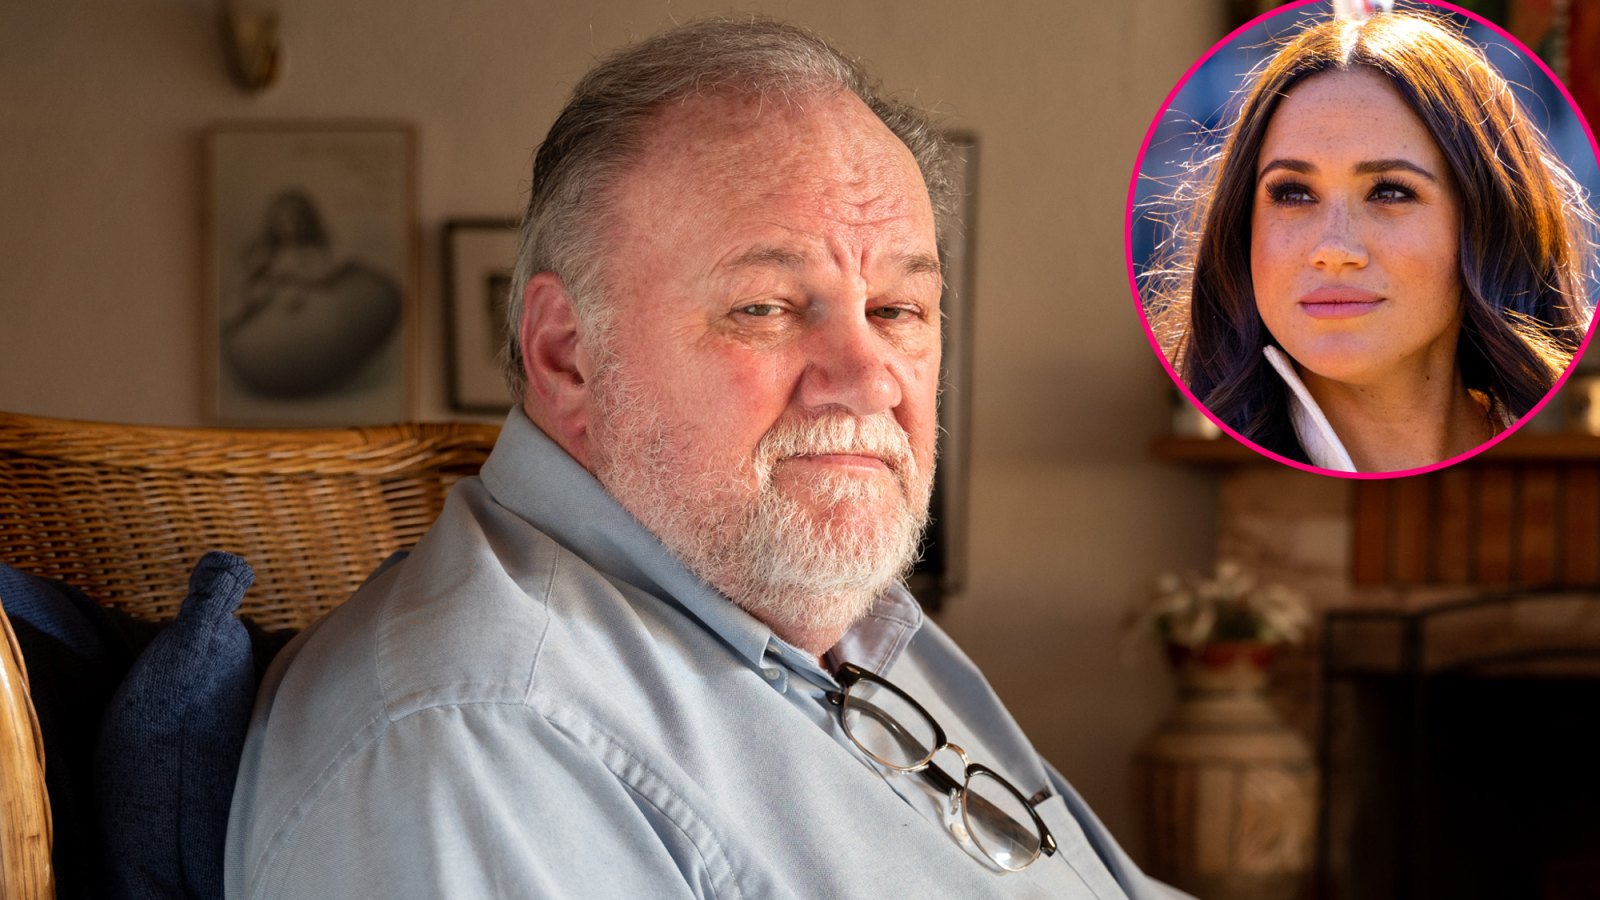 Meghan Markle's Dad Thomas Markle Is Home From the Hospital 5 Days After Apparent Stroke: 'I Am Lucky to Be Alive'